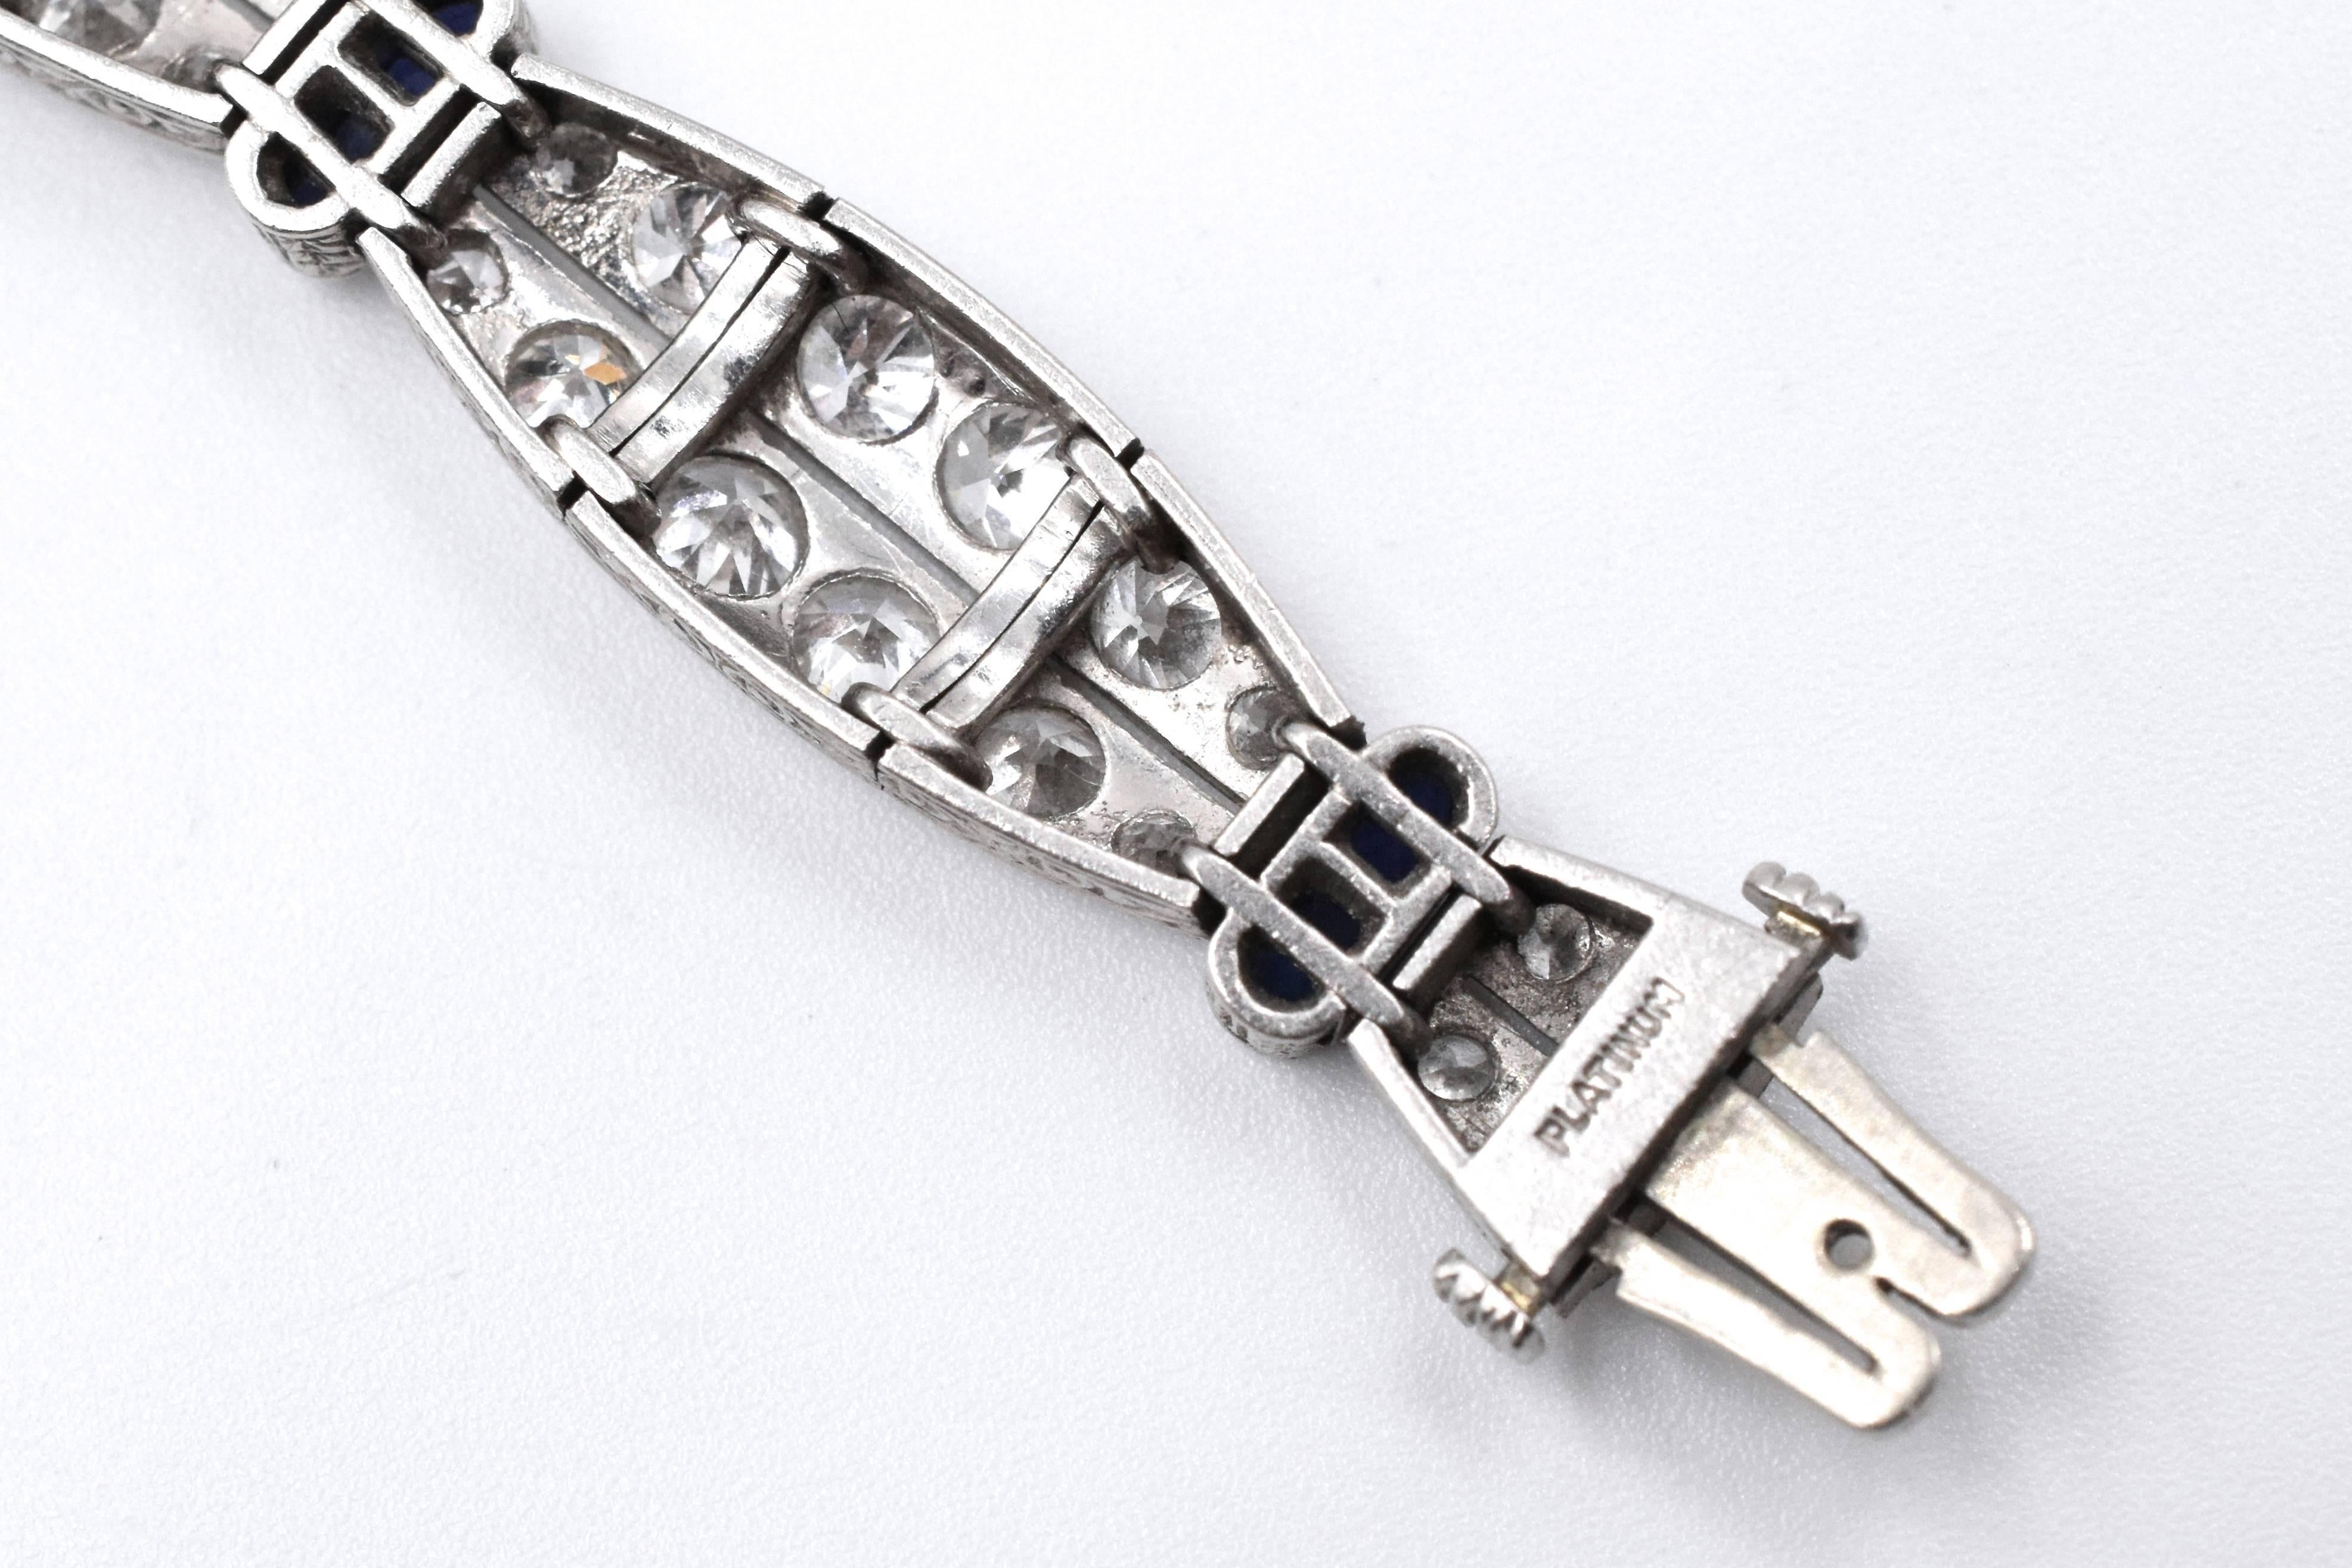 1930s Art Deco diamond and sapphire bracelet,  with 8 diamond sections with sapphire sections in between, set with 96 graduating gold European cut diamonds with approximate total weight of 10 carats and 16 french cut sapphires with approximate